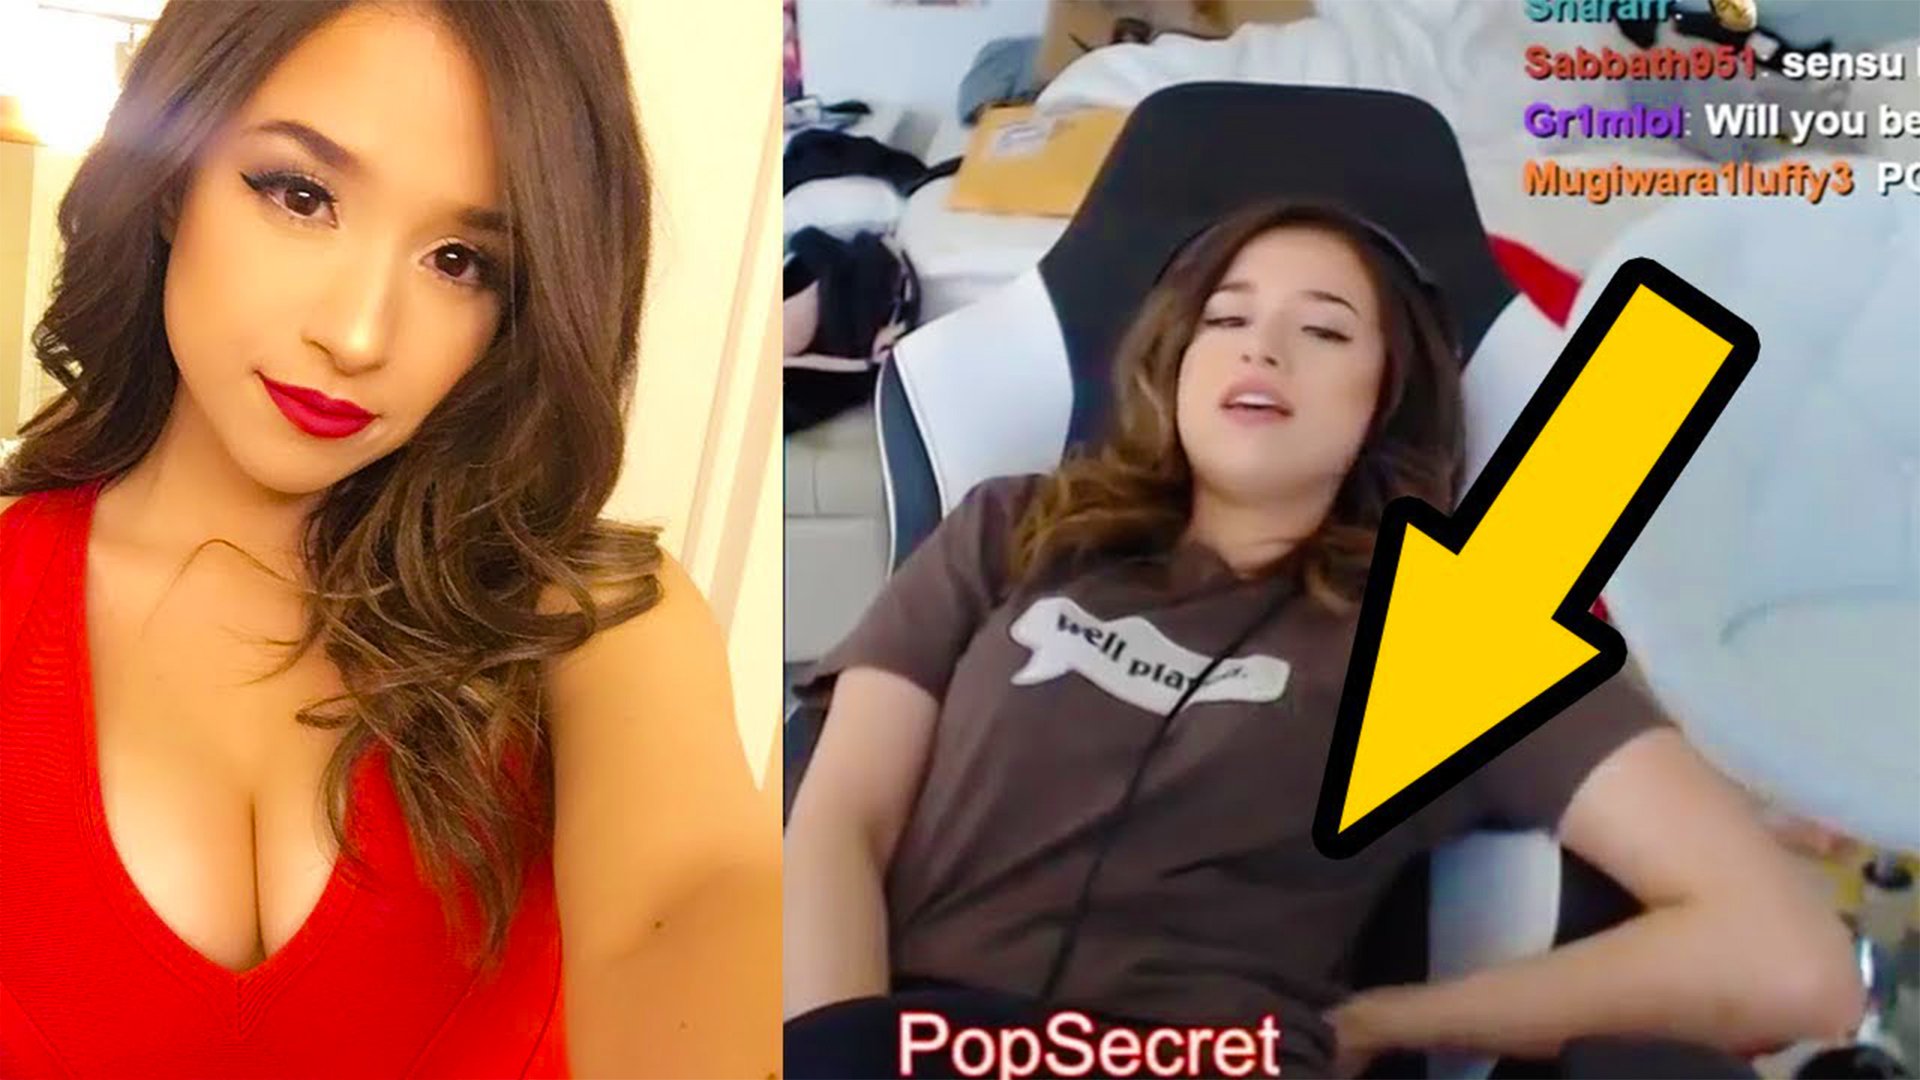 “Pokimane Funny Thicc Moments Hot Compilation 2019! 😱😍
LINK 👉 ht...